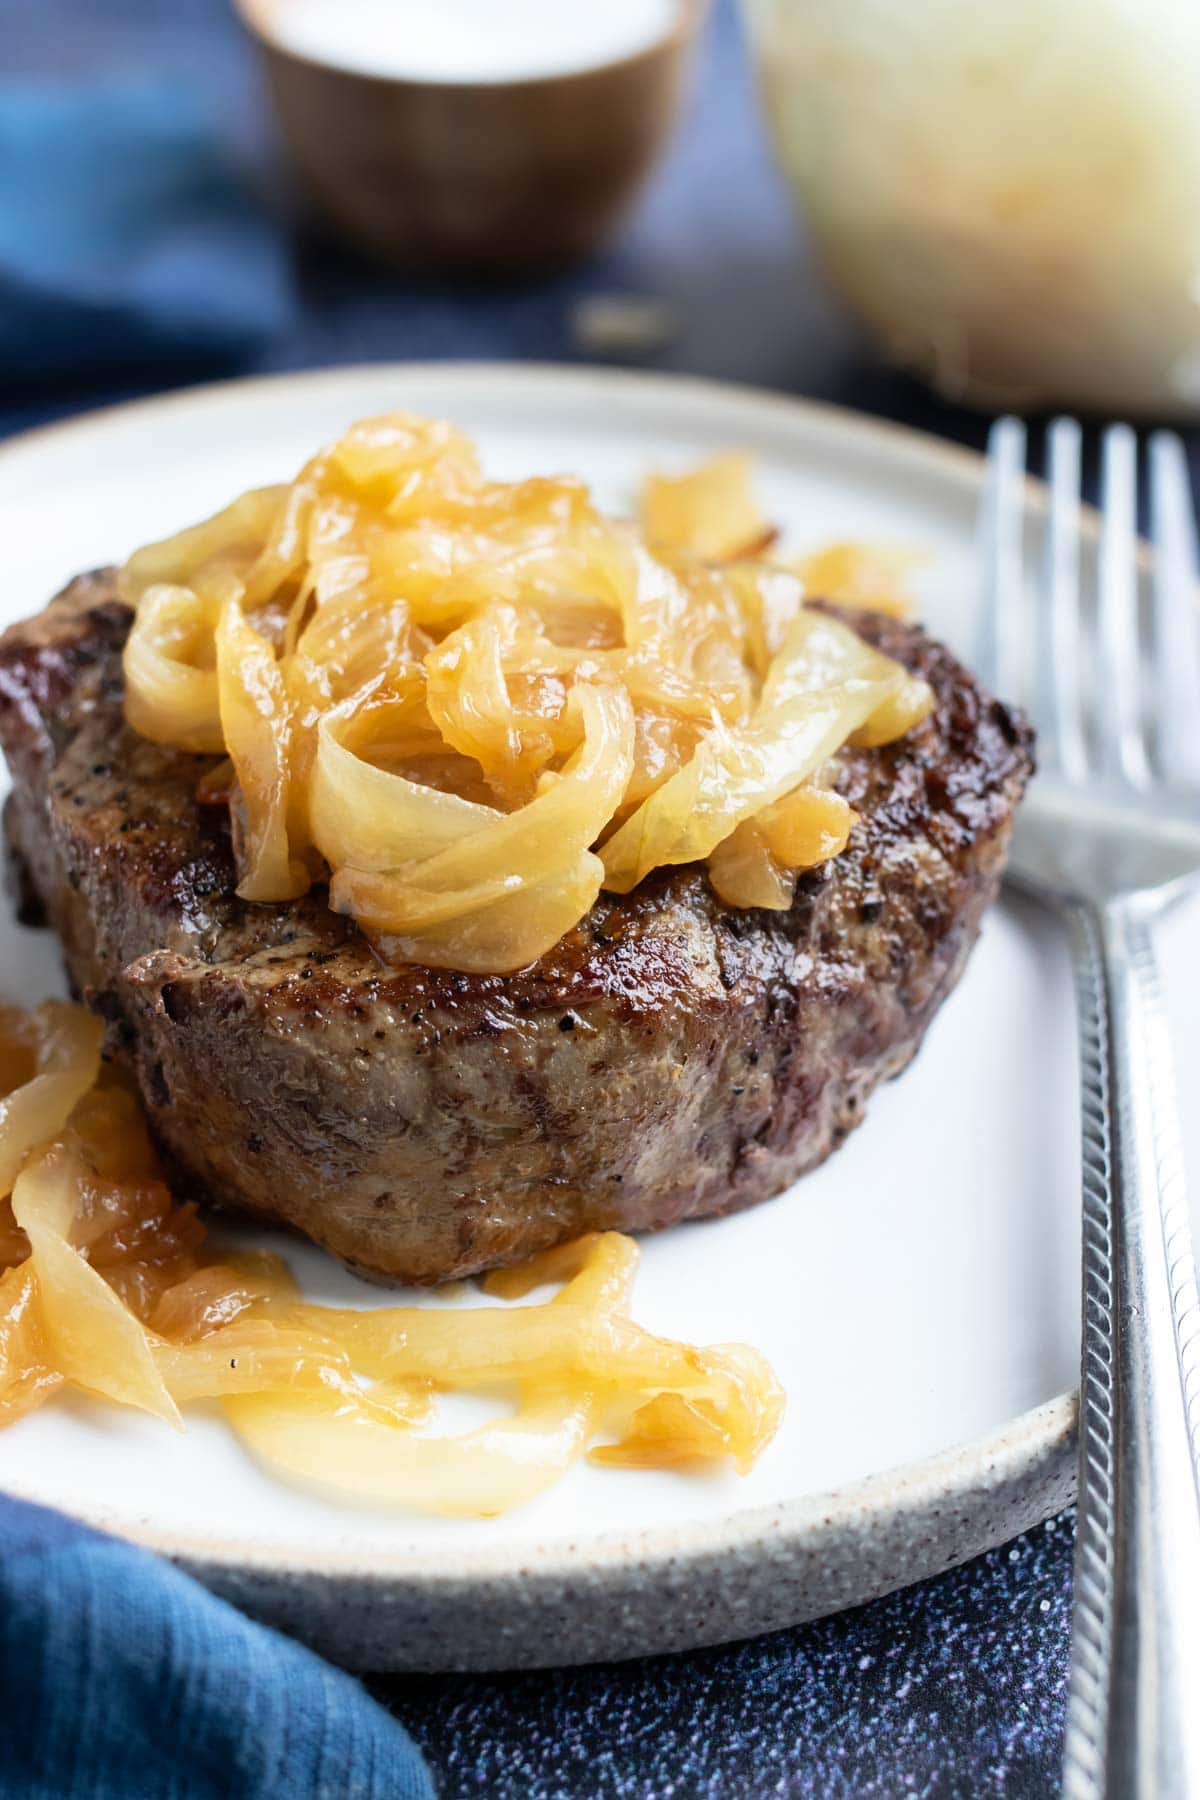 An image showing filet mignon with homemade caramelized onions on top.